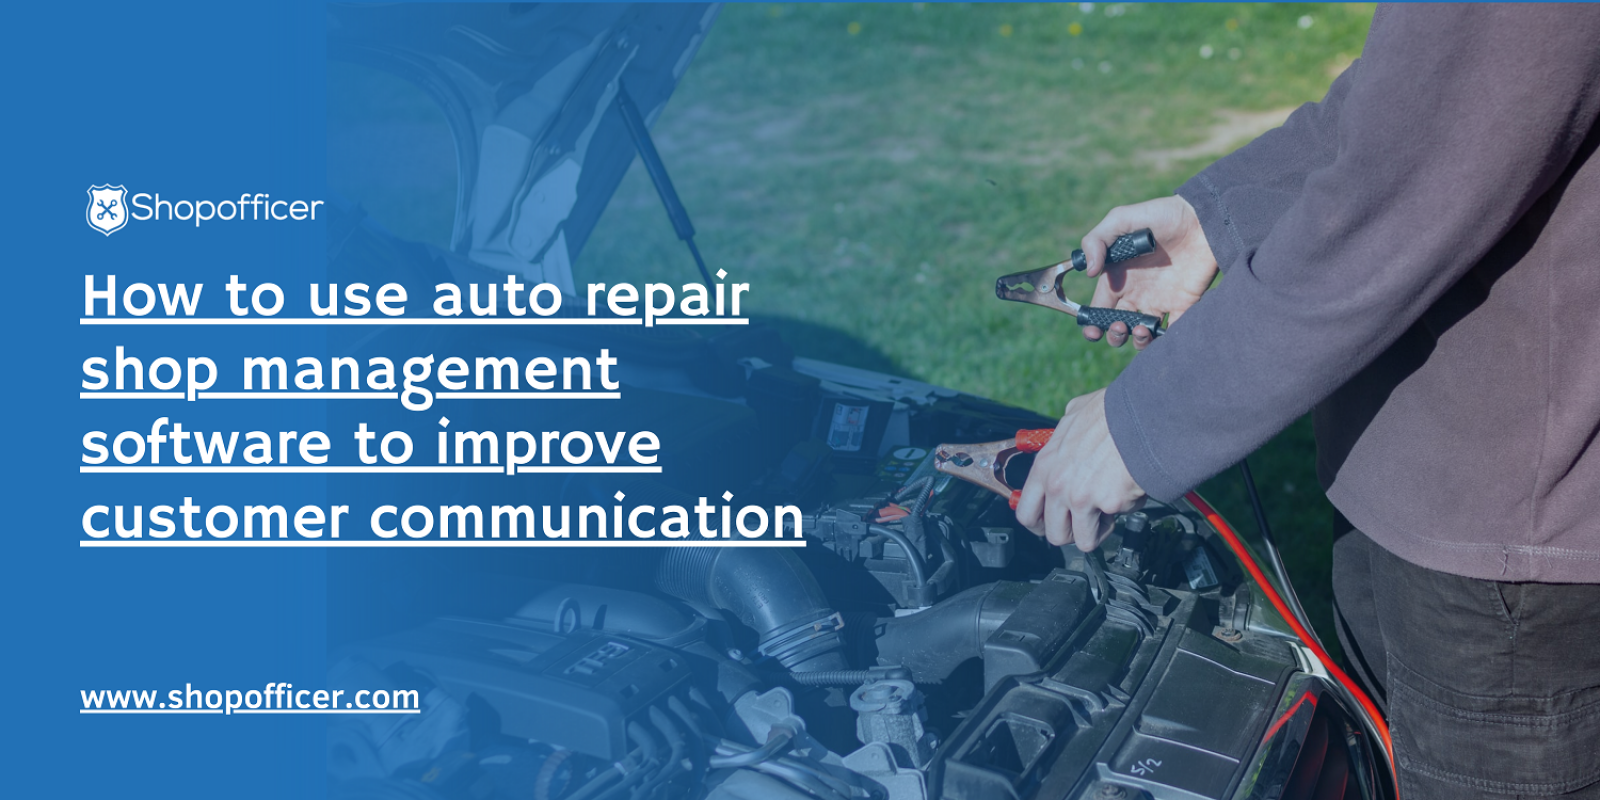 How to use auto repair shop management software to improve customer communication